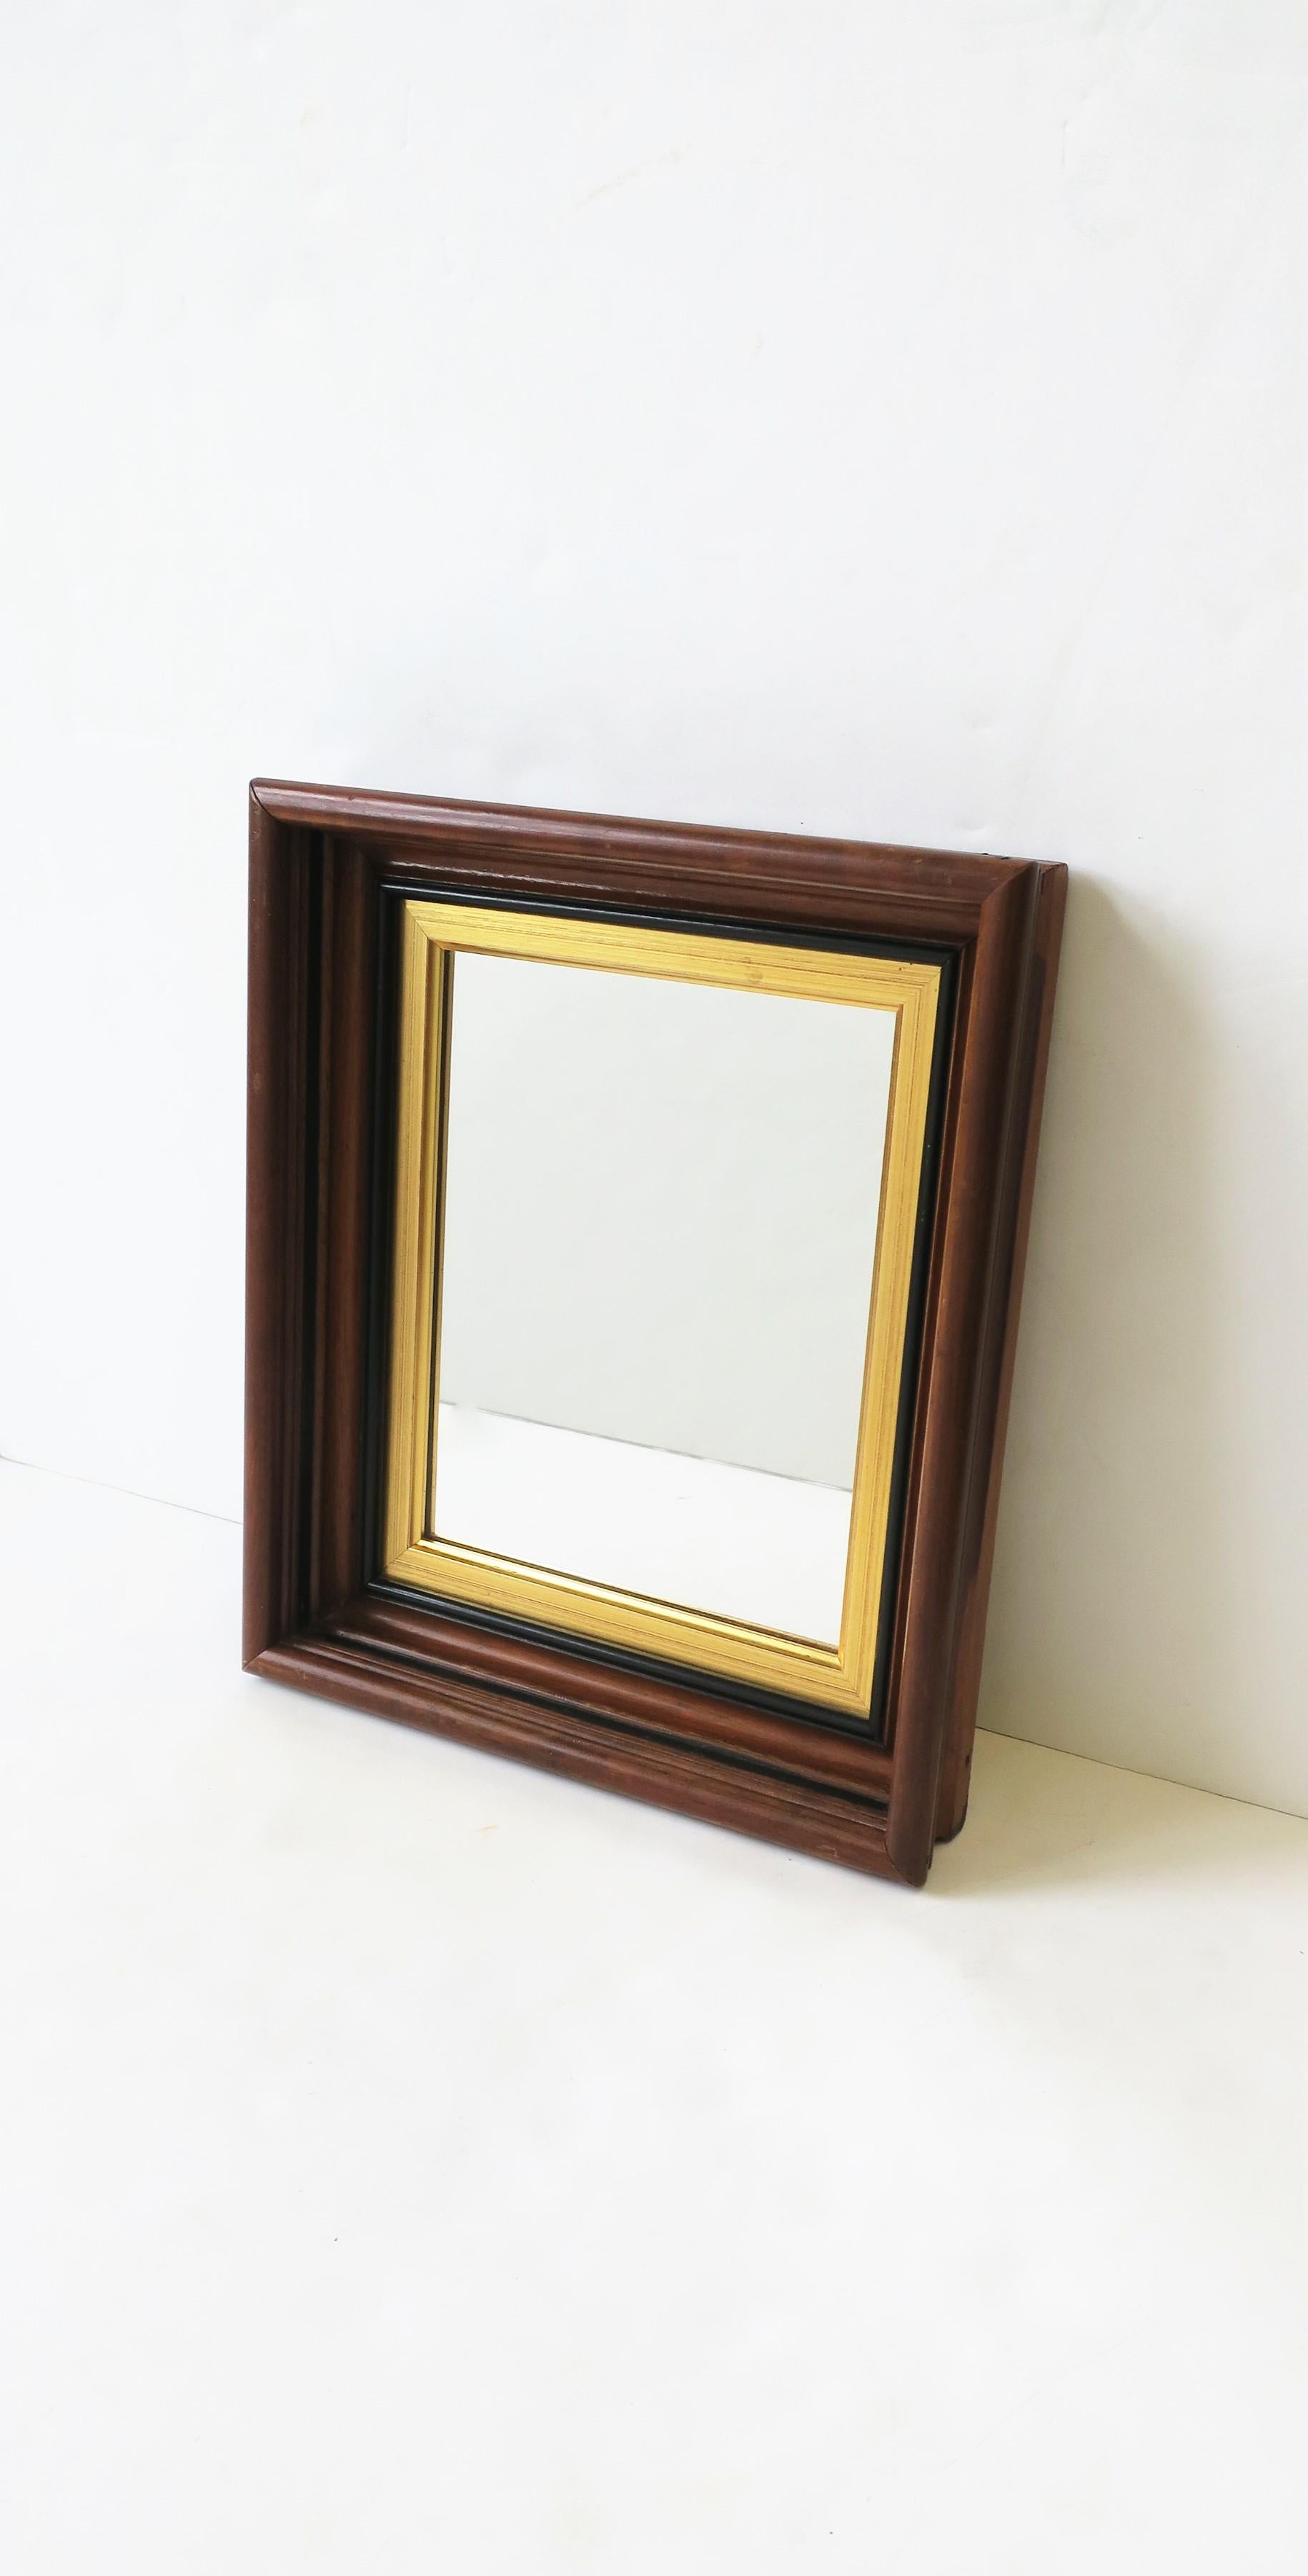 European Brown Wood and Gold Giltwood Framed Wall or Vanity Mirror